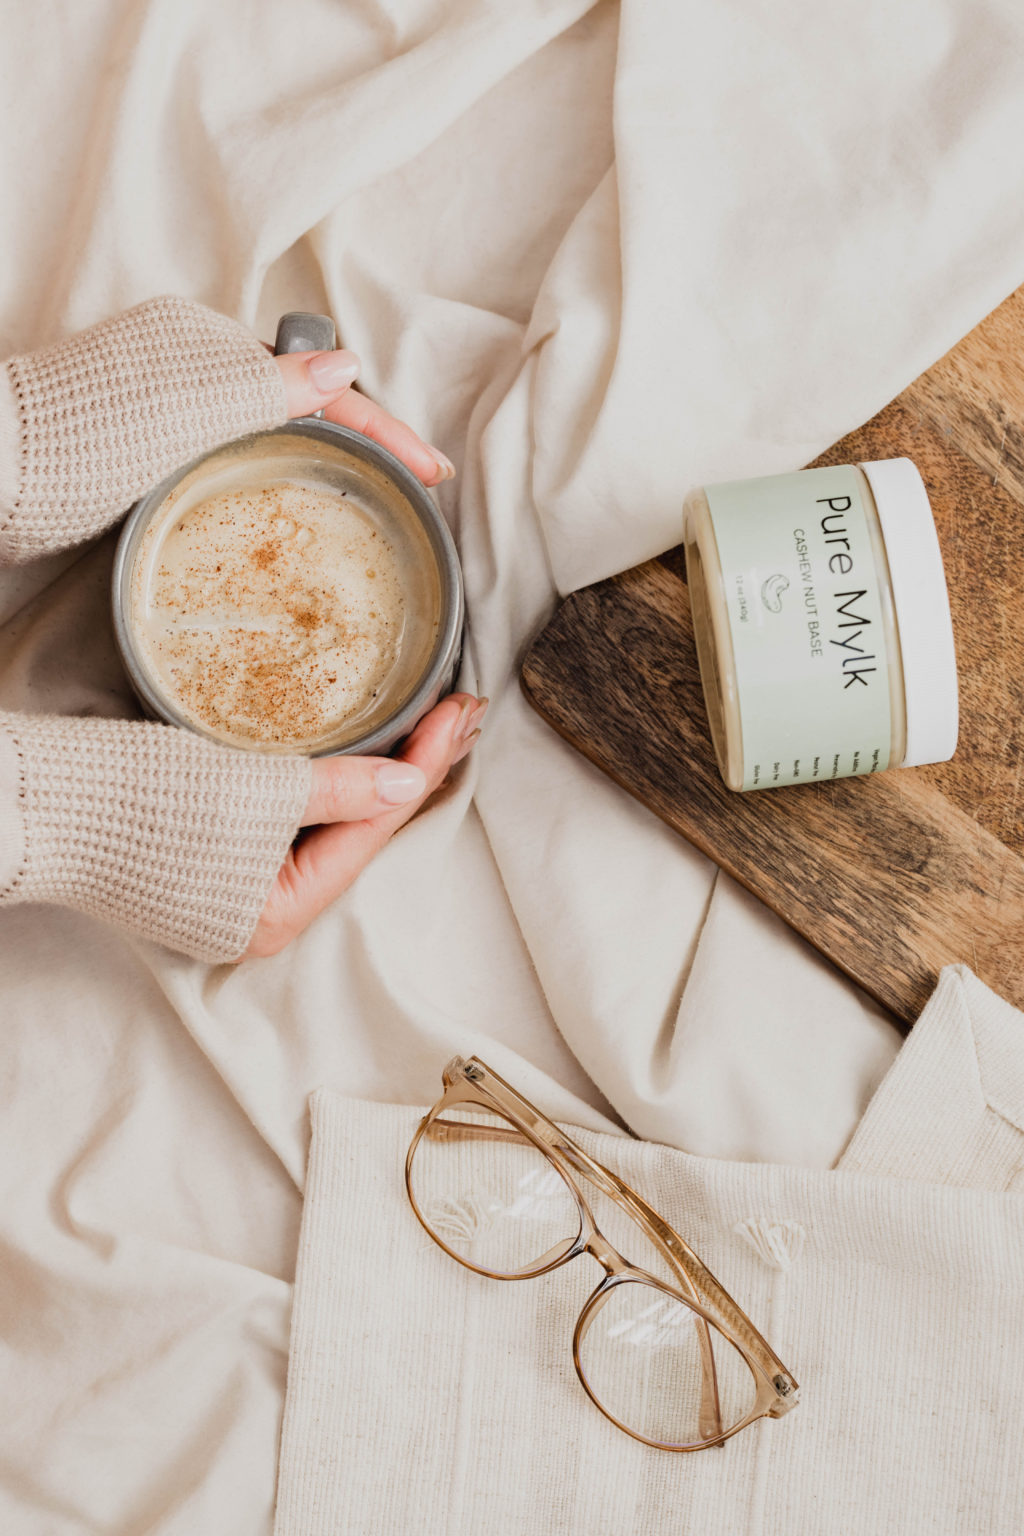 Image of Pure Mylk Chase nut base cream. Hands grip a mug with the cream inside.